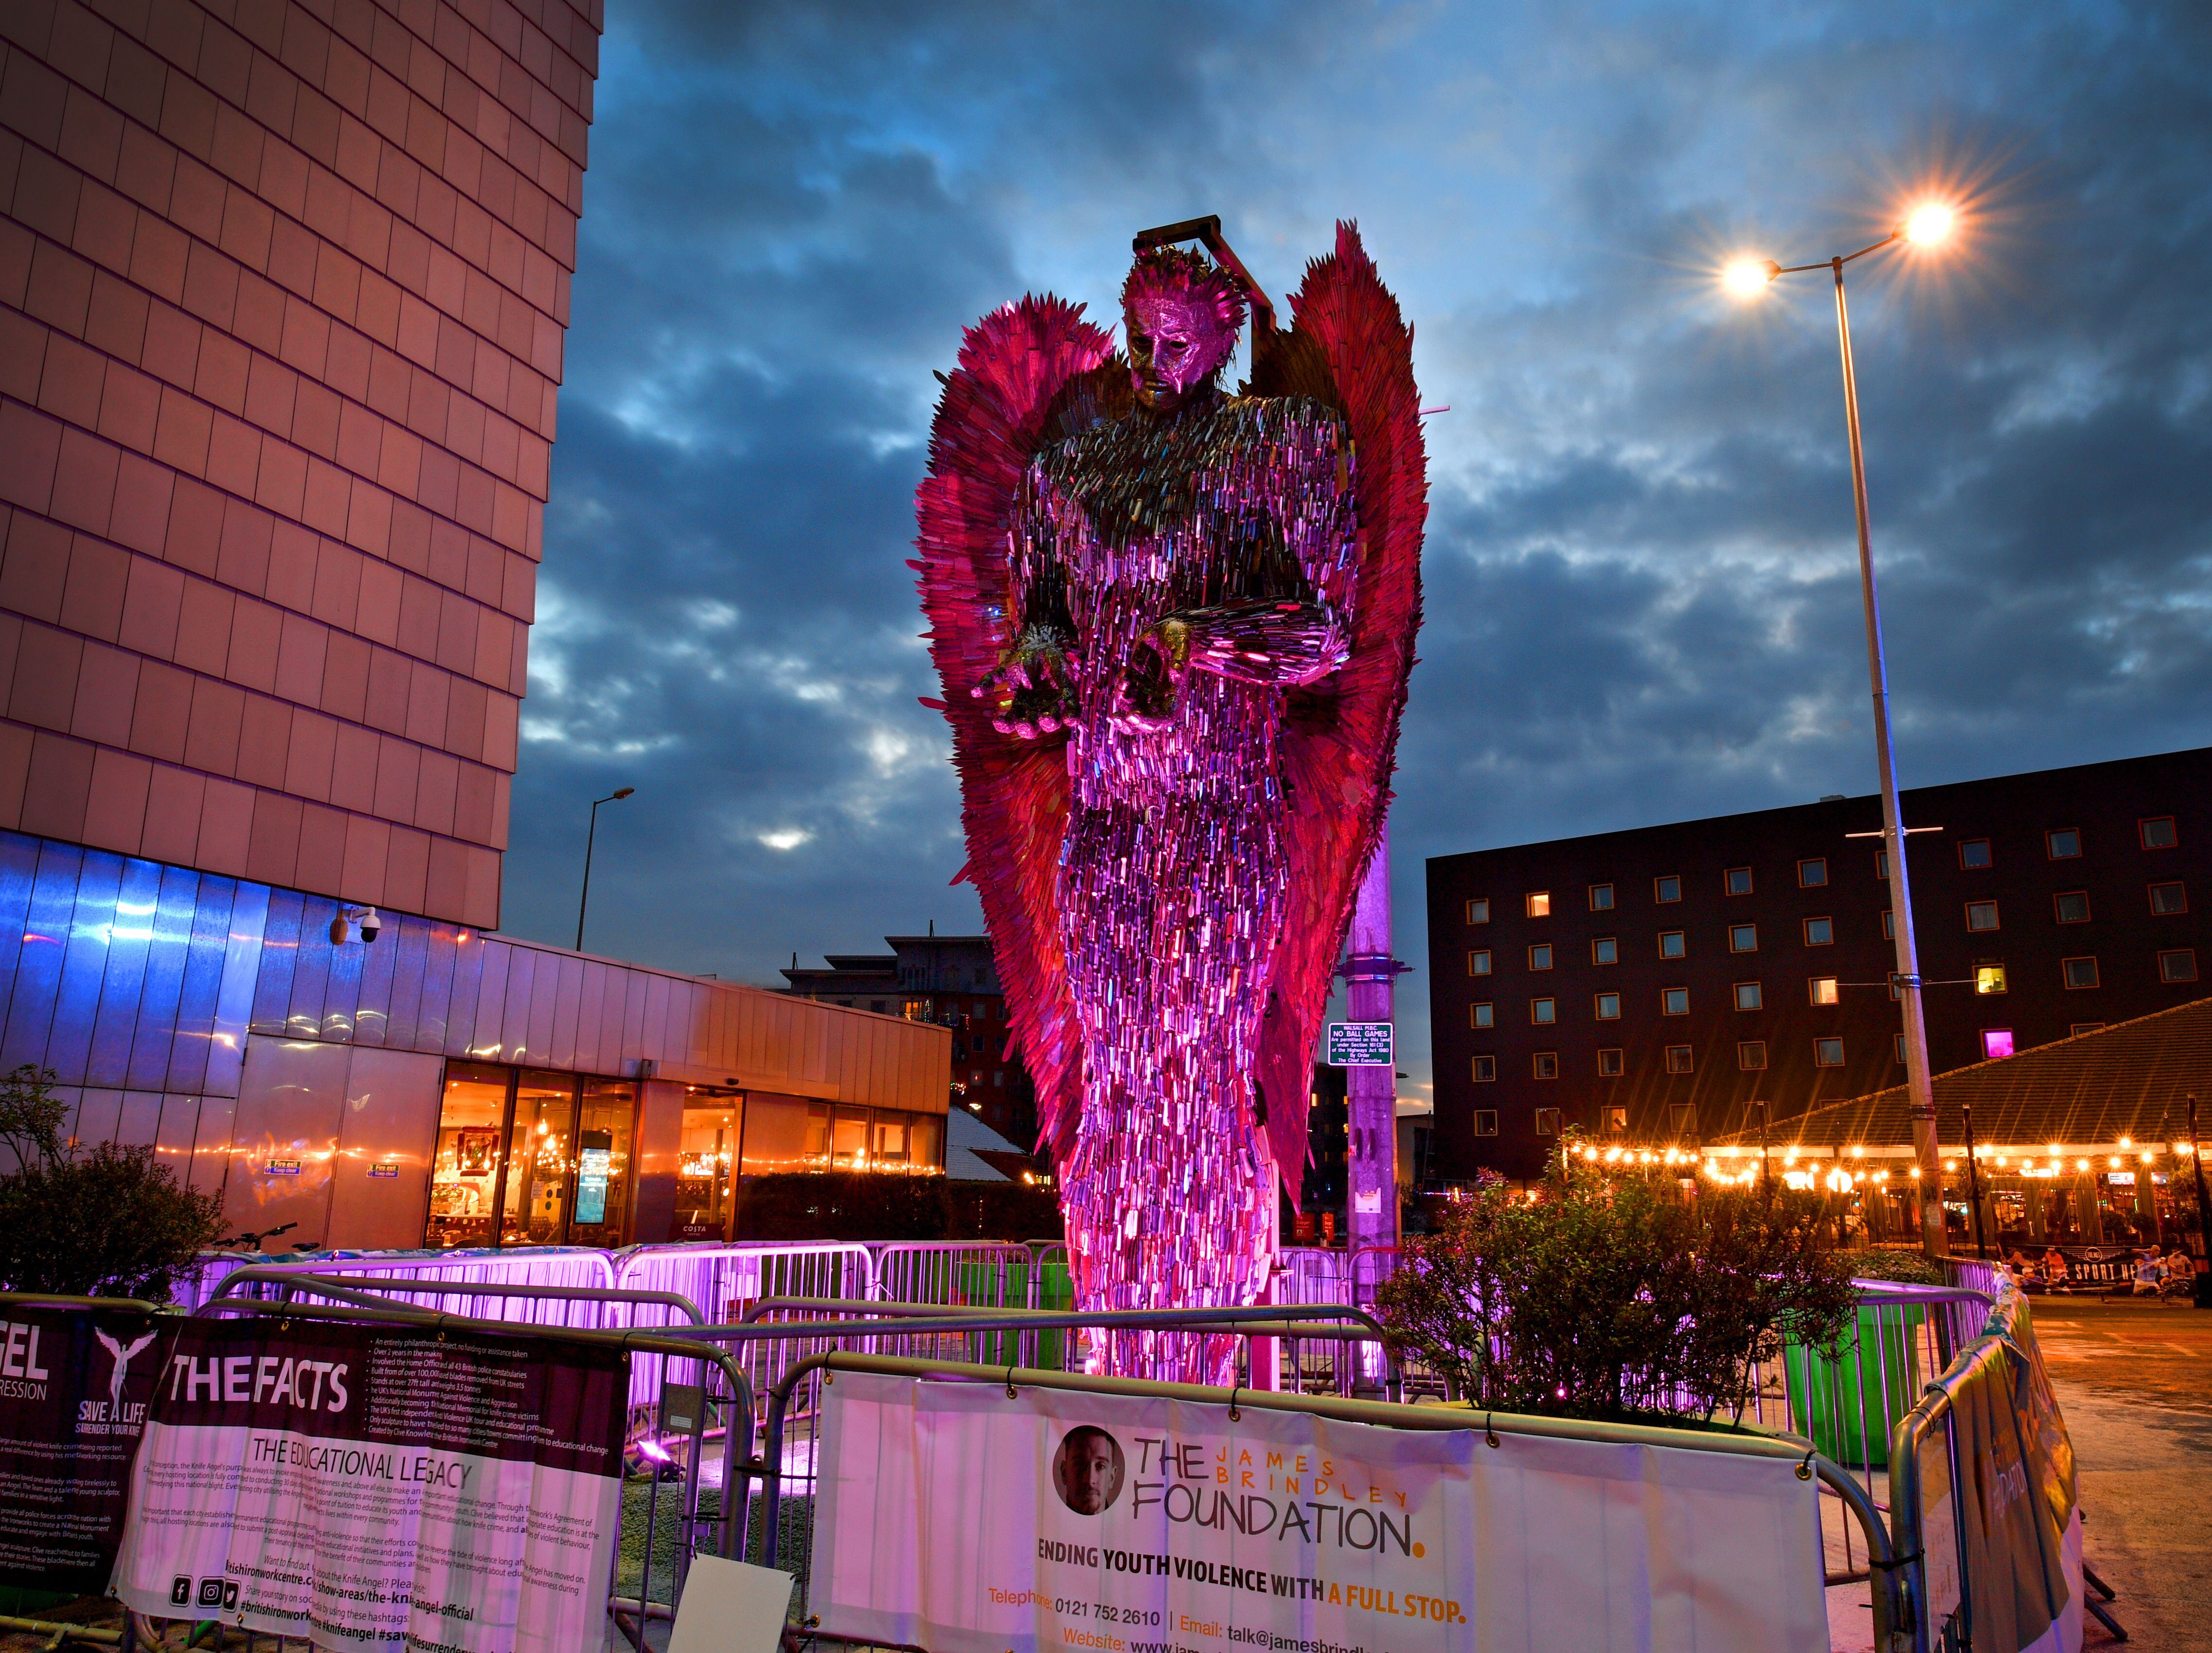 Powerful and evocative image of Knife Angel in Walsall